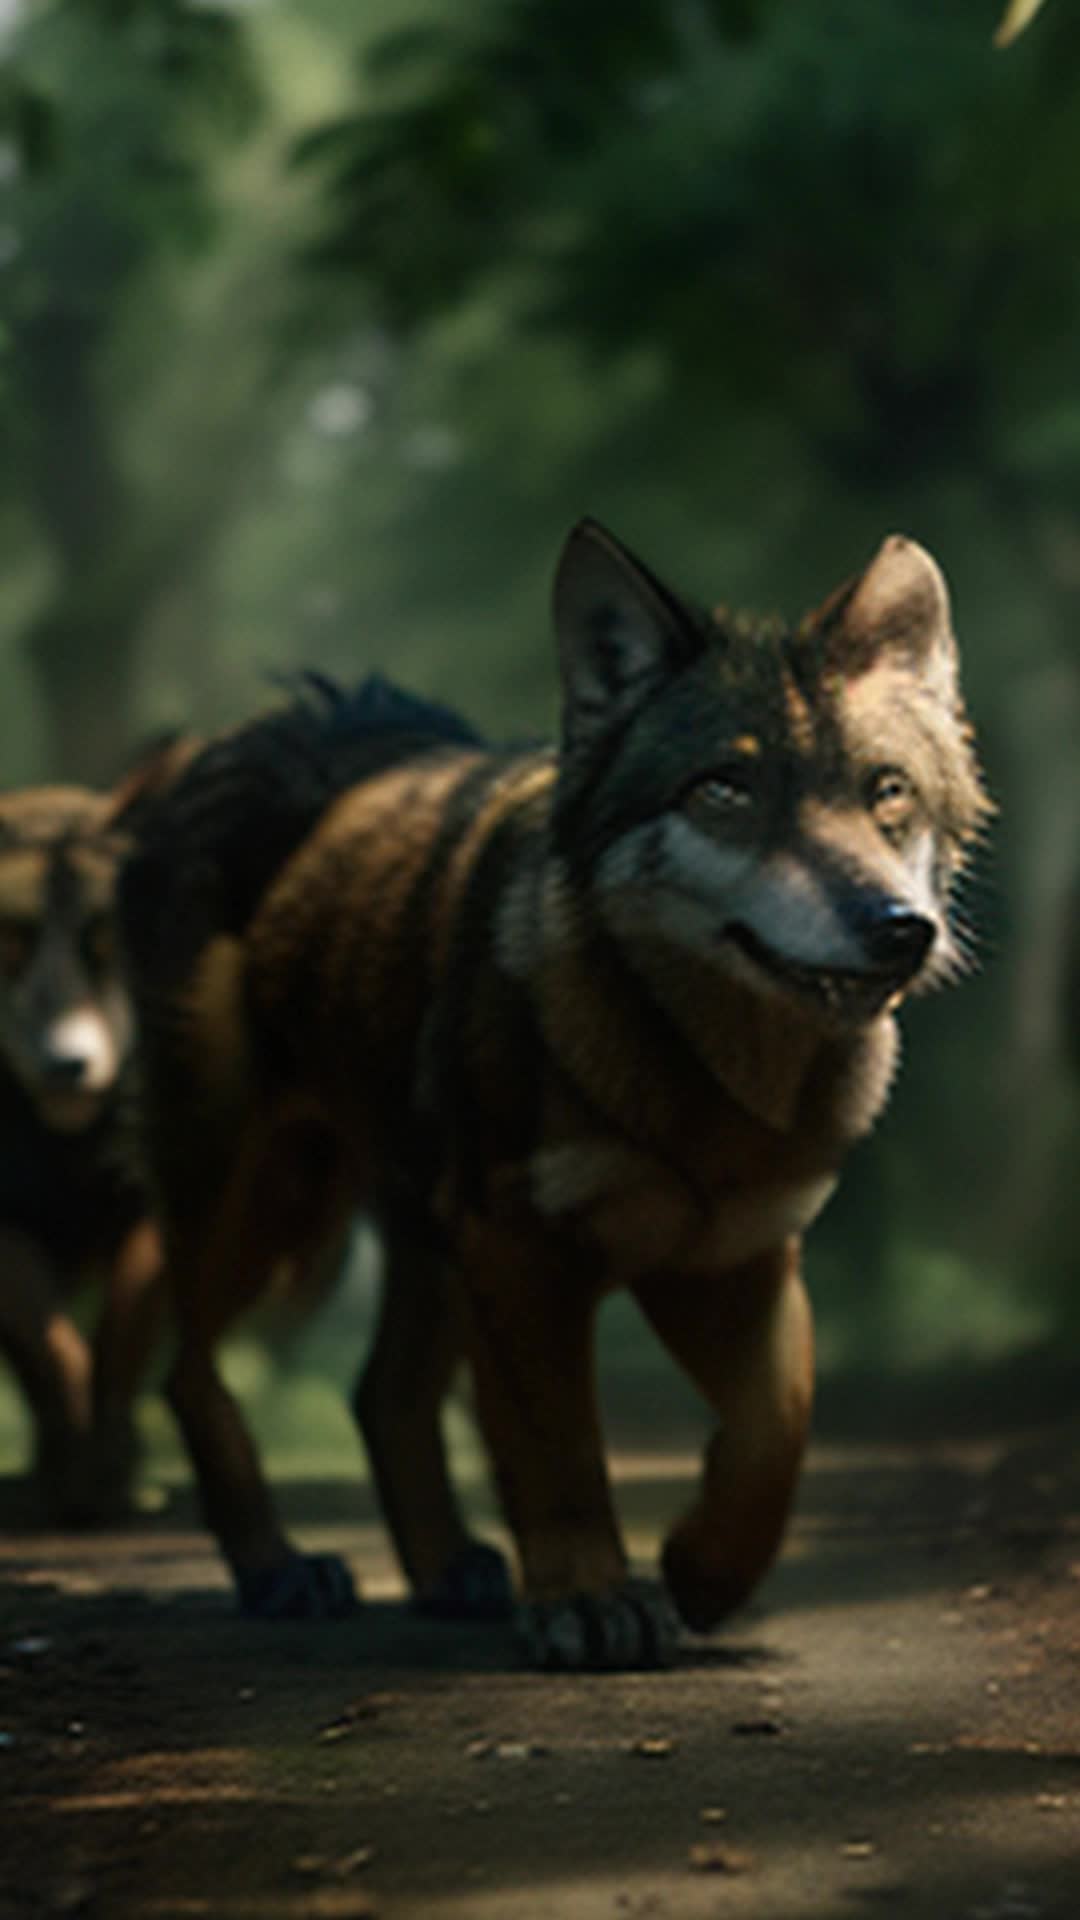 Wise wolf leading jungle animals, daring counterattack, natural abilities in use, developers stalled, verdant paradise protected, action-packed, soft shadows, highly detailed and sharp focus